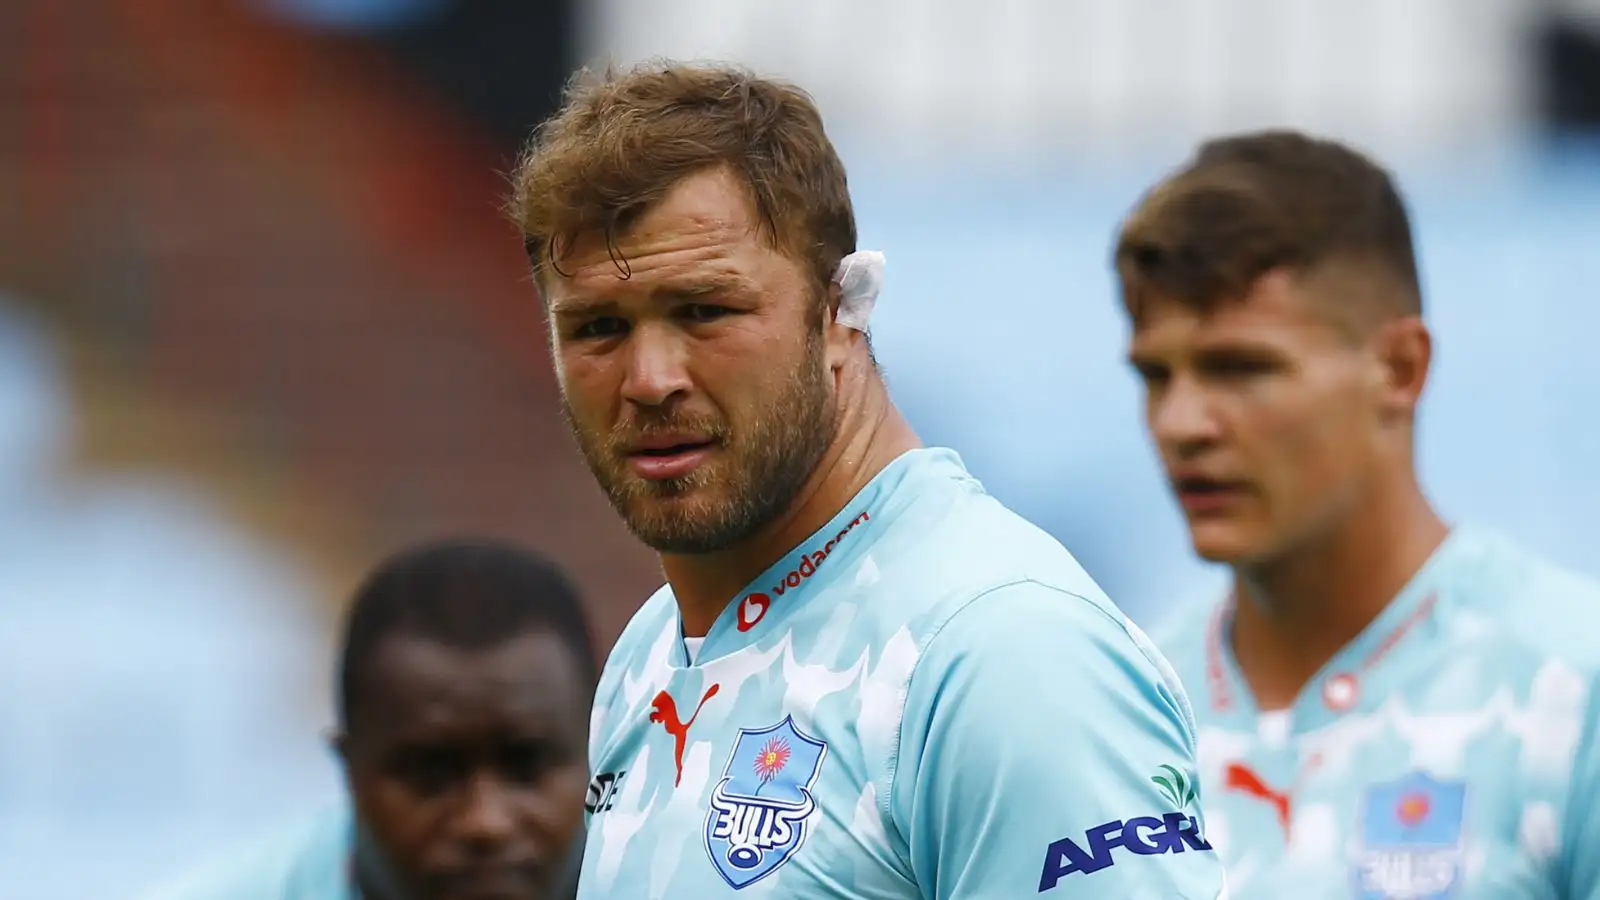 bulls Springboks veteran Duane Vermeulen is in talks to return to South Africa with a former club following his departure from URC side Ulster.